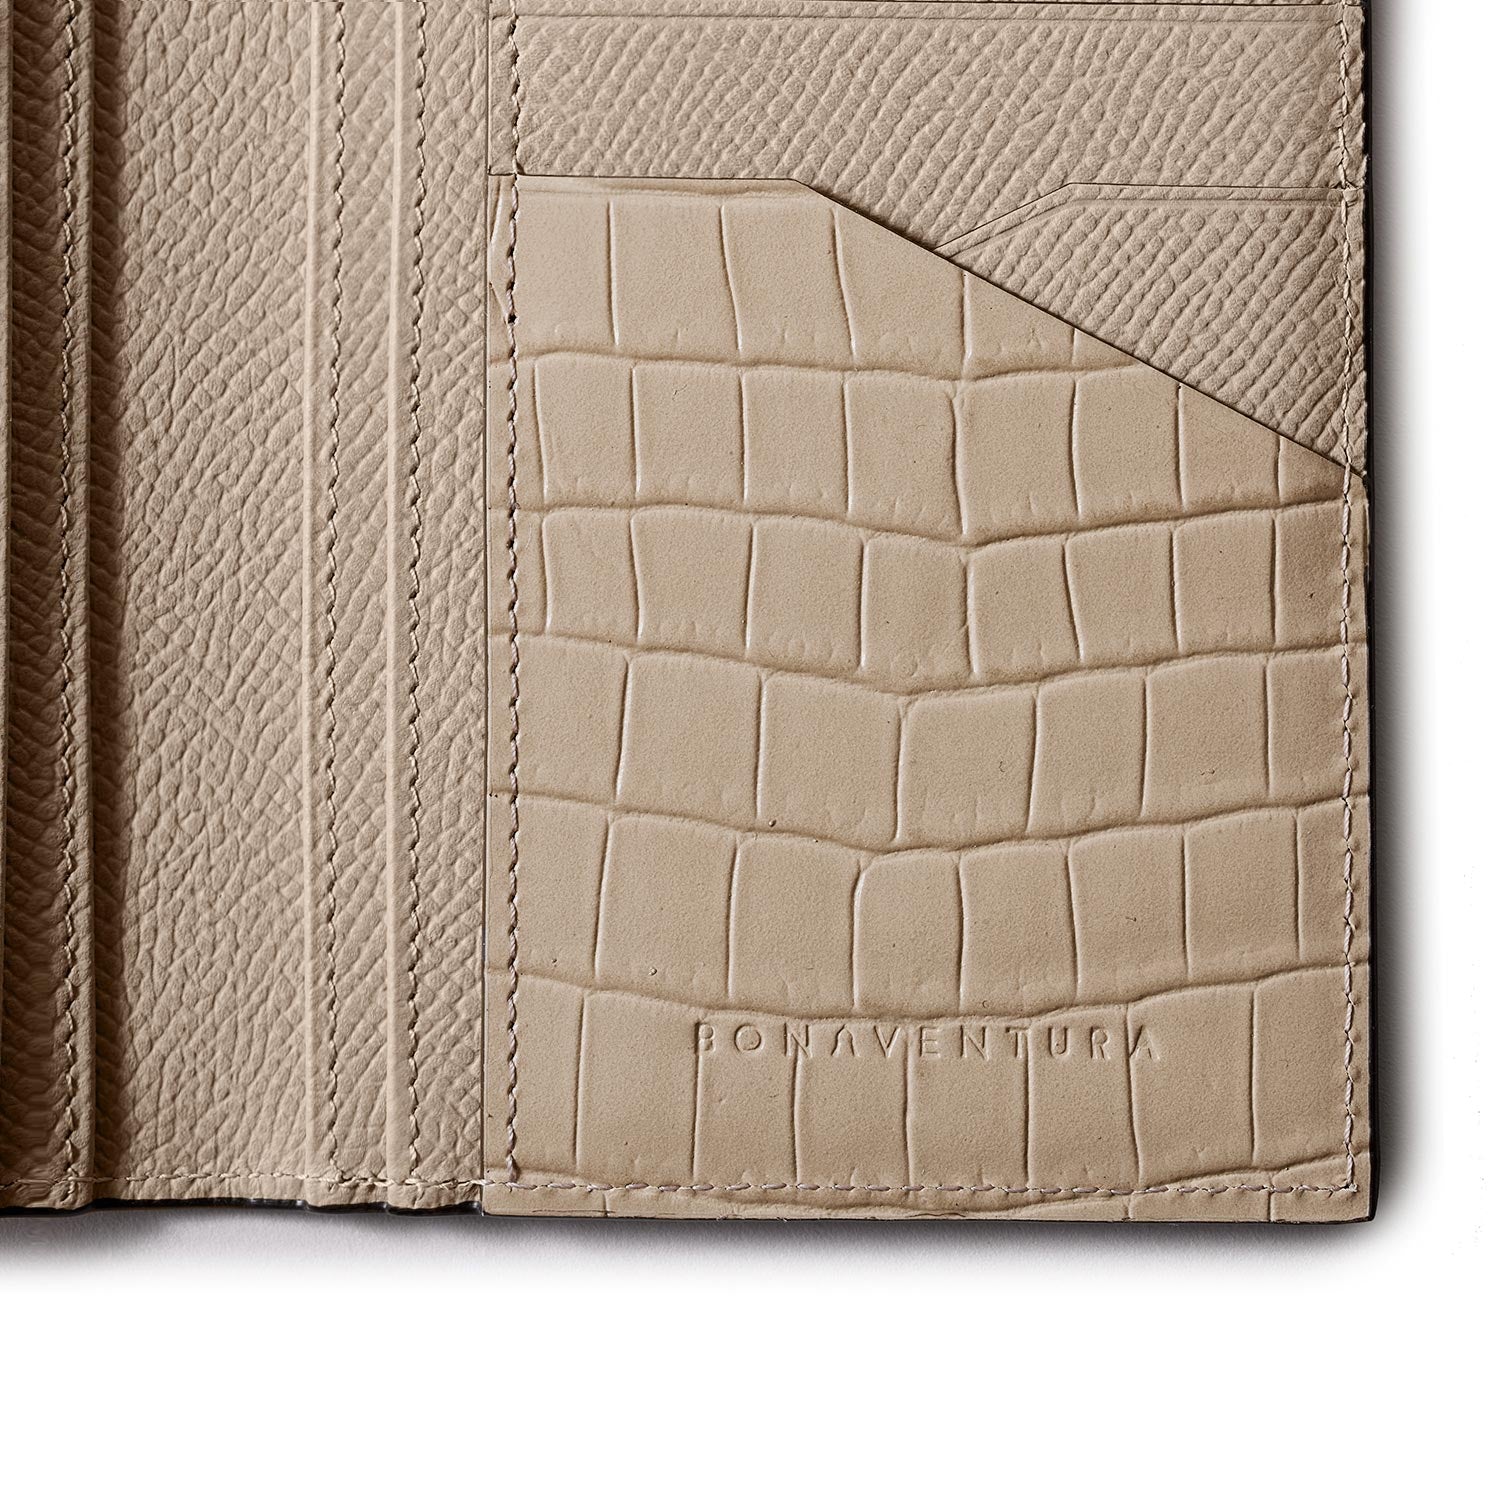 Long card wallet in Noblesse and embossed crocodile leather